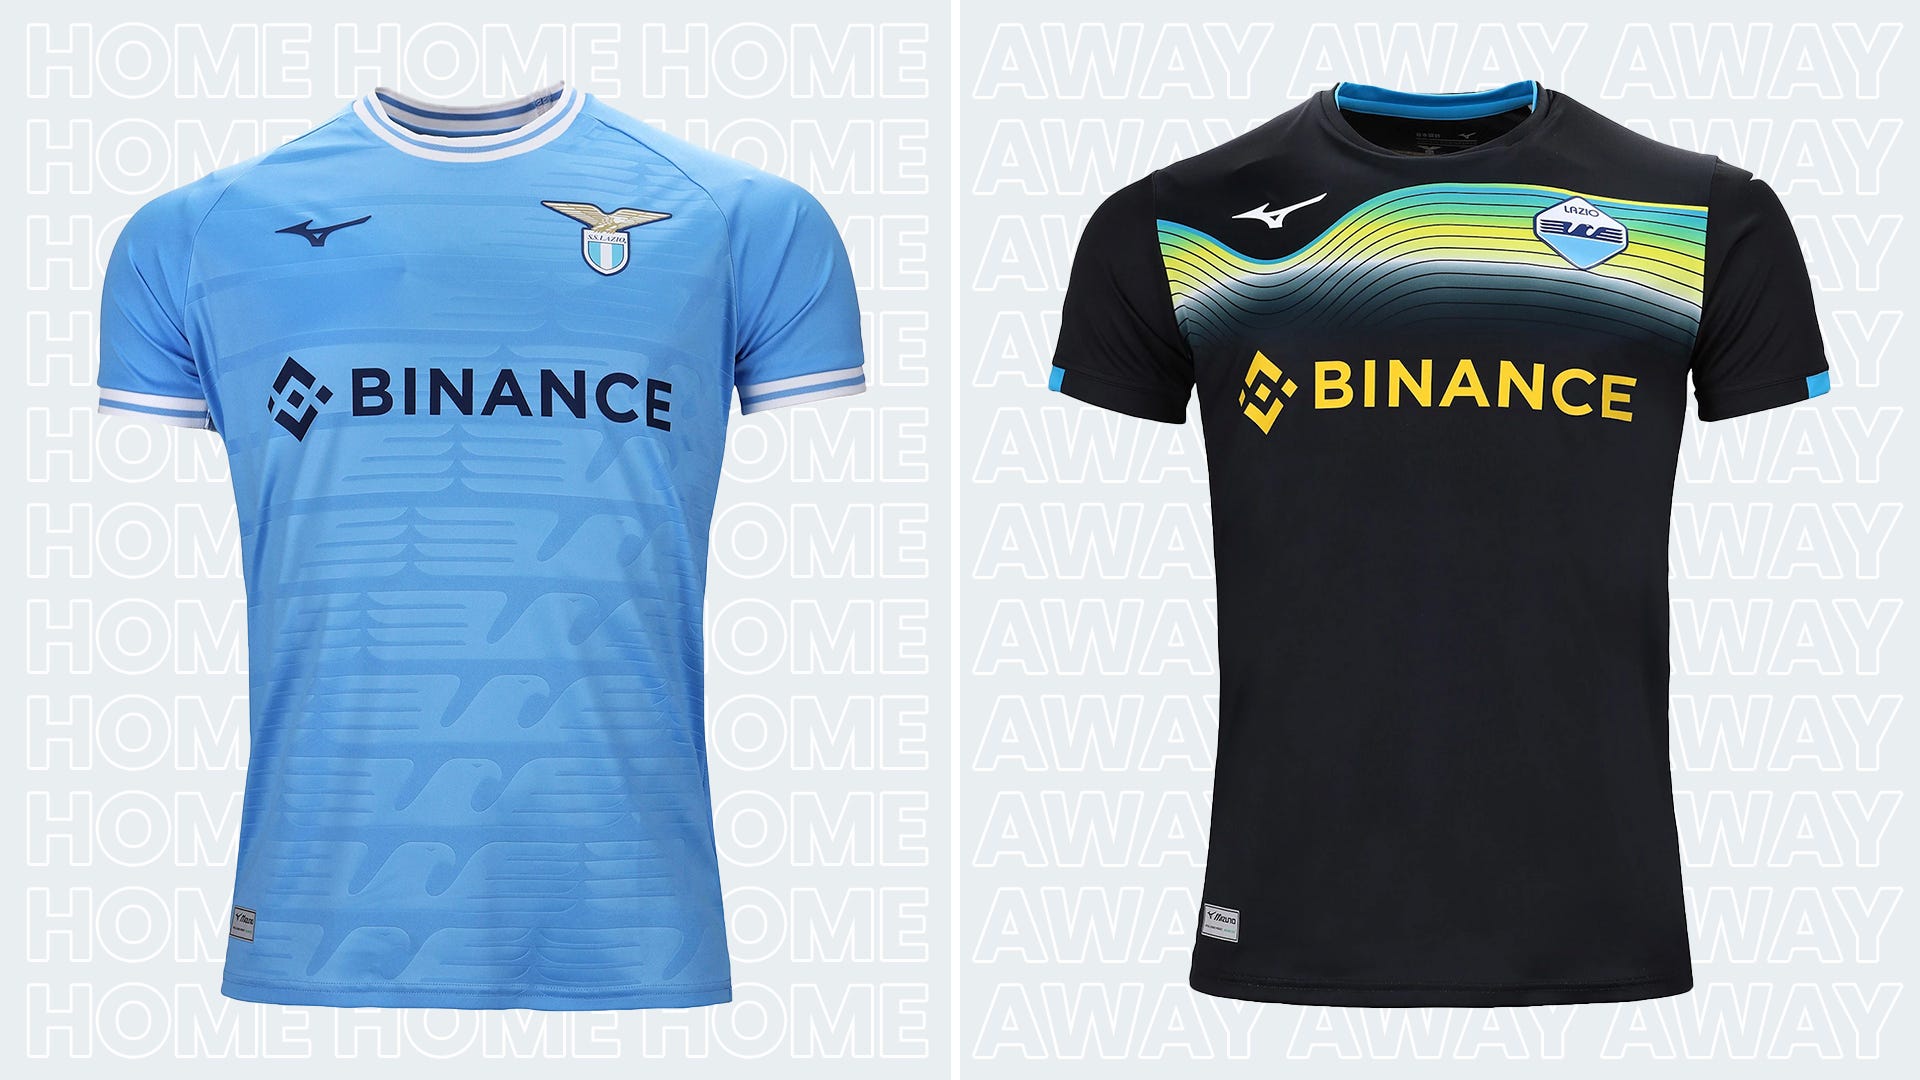 European soccer's best (and worst) jerseys this season, reviewed